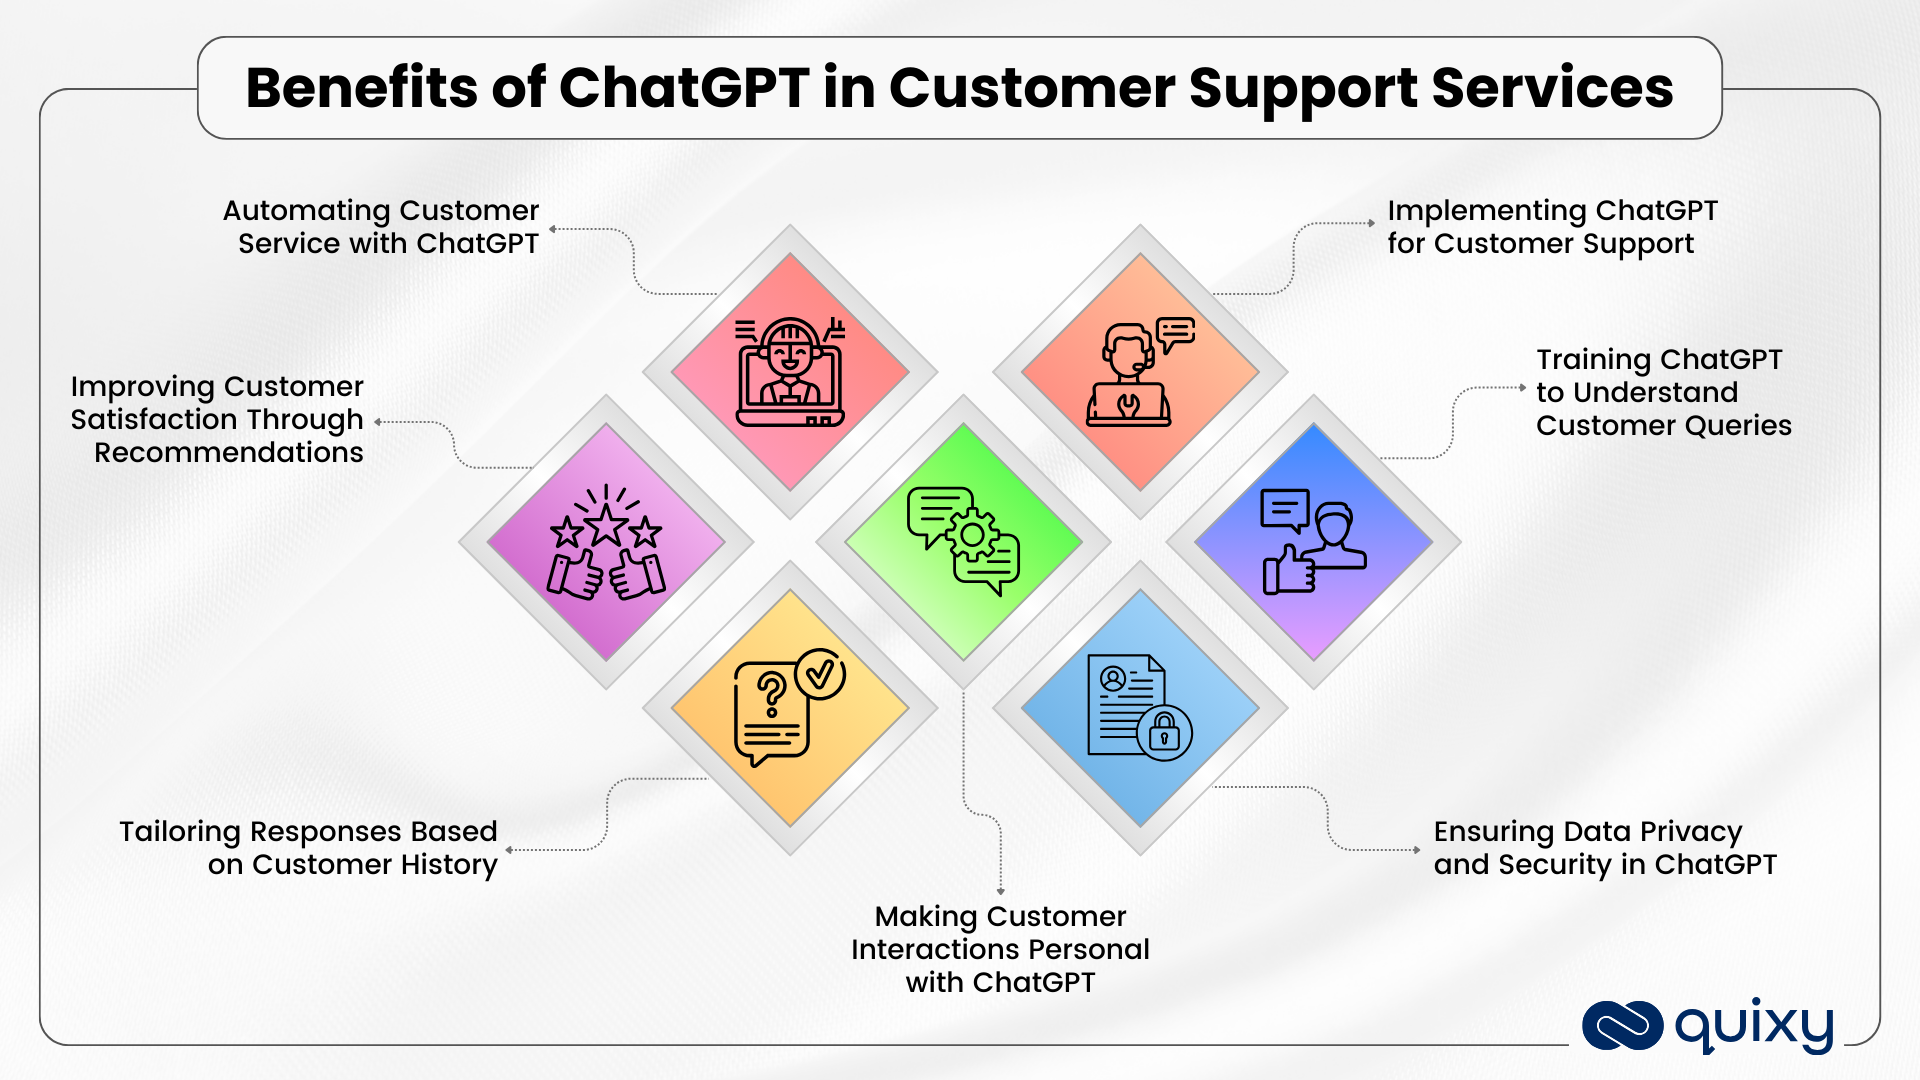 Benefits of ChatGPT in Customer Support Services